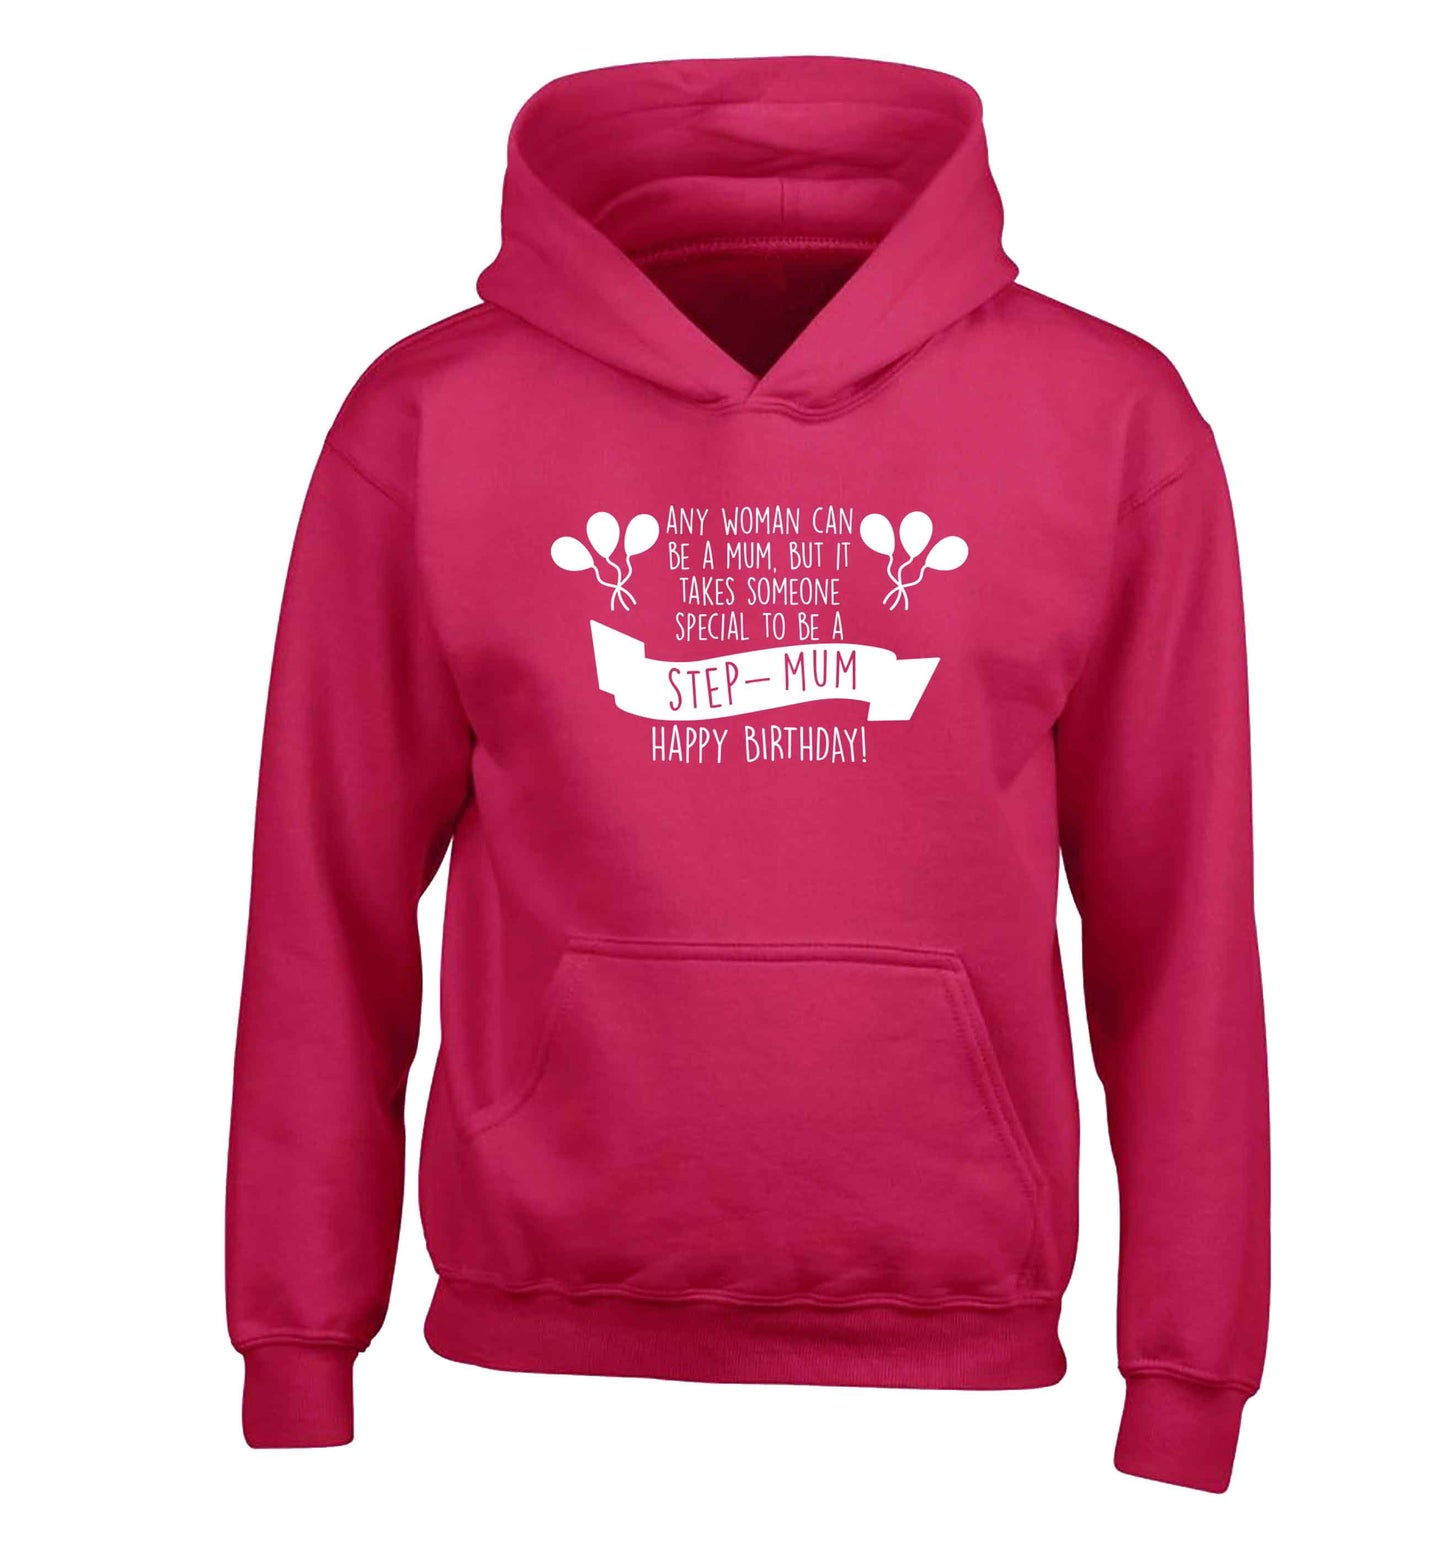 Takes someone special to be a step-mum, happy birthday! children's pink hoodie 12-13 Years